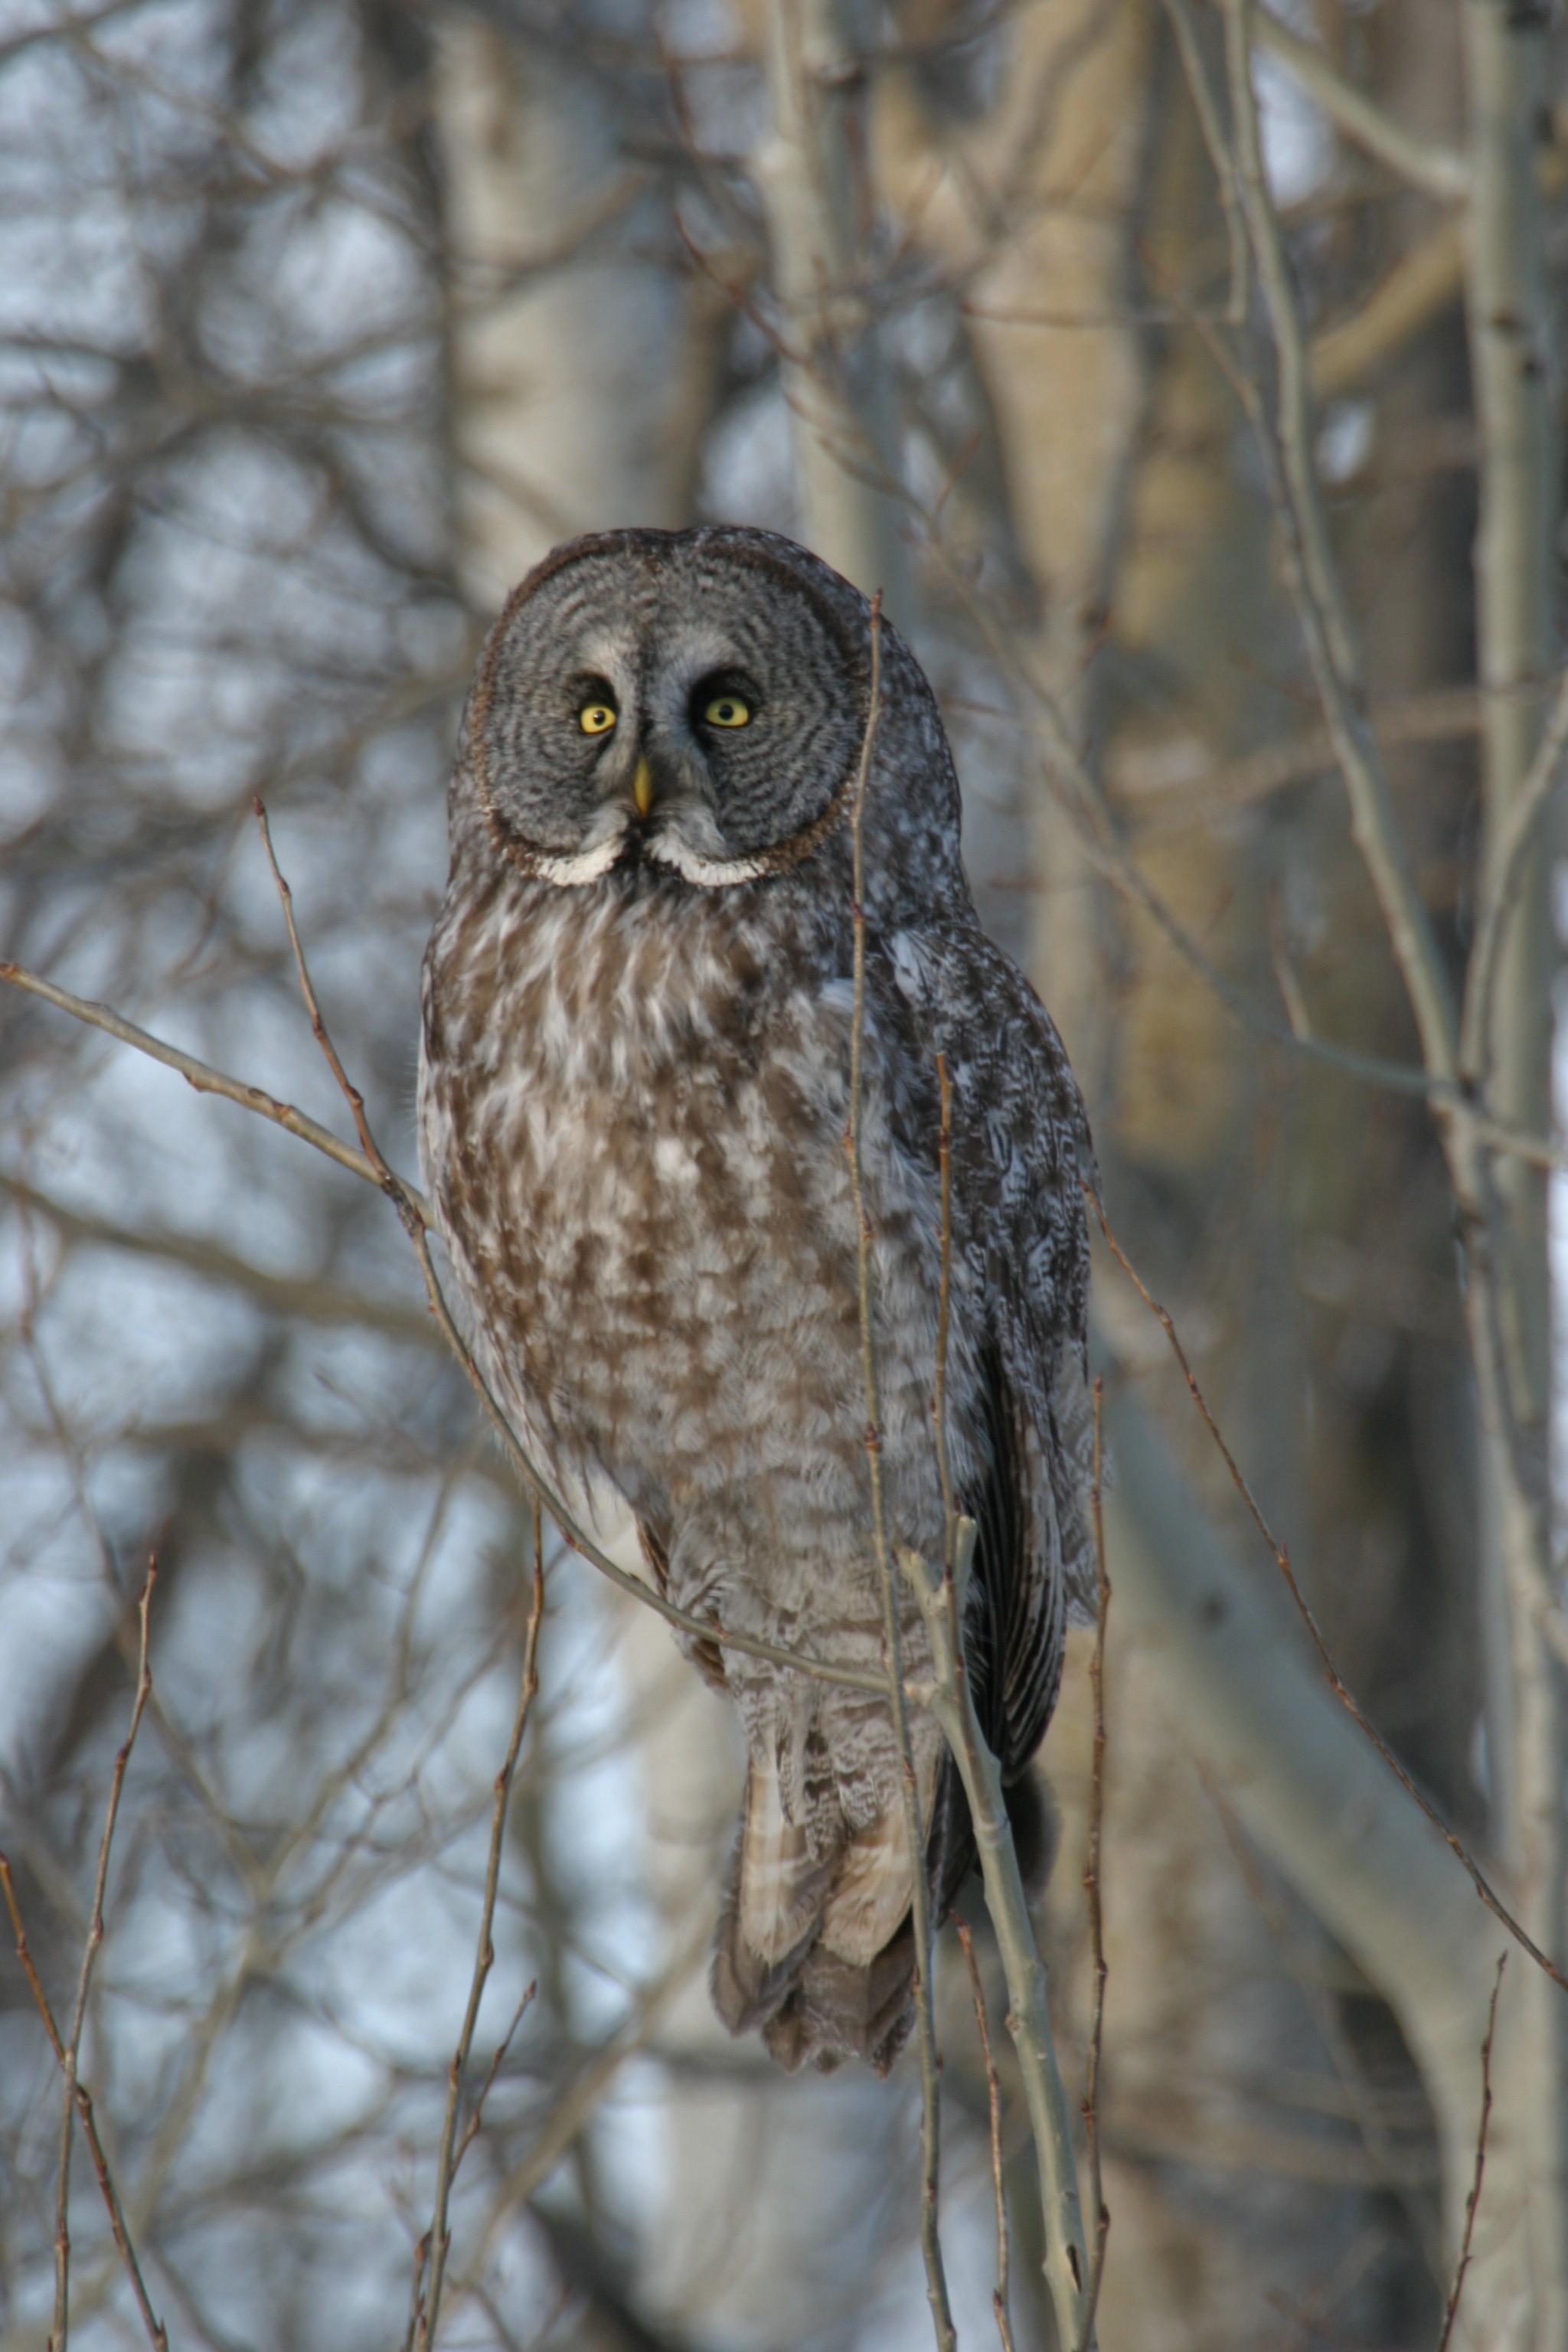 A Great Gray Owl